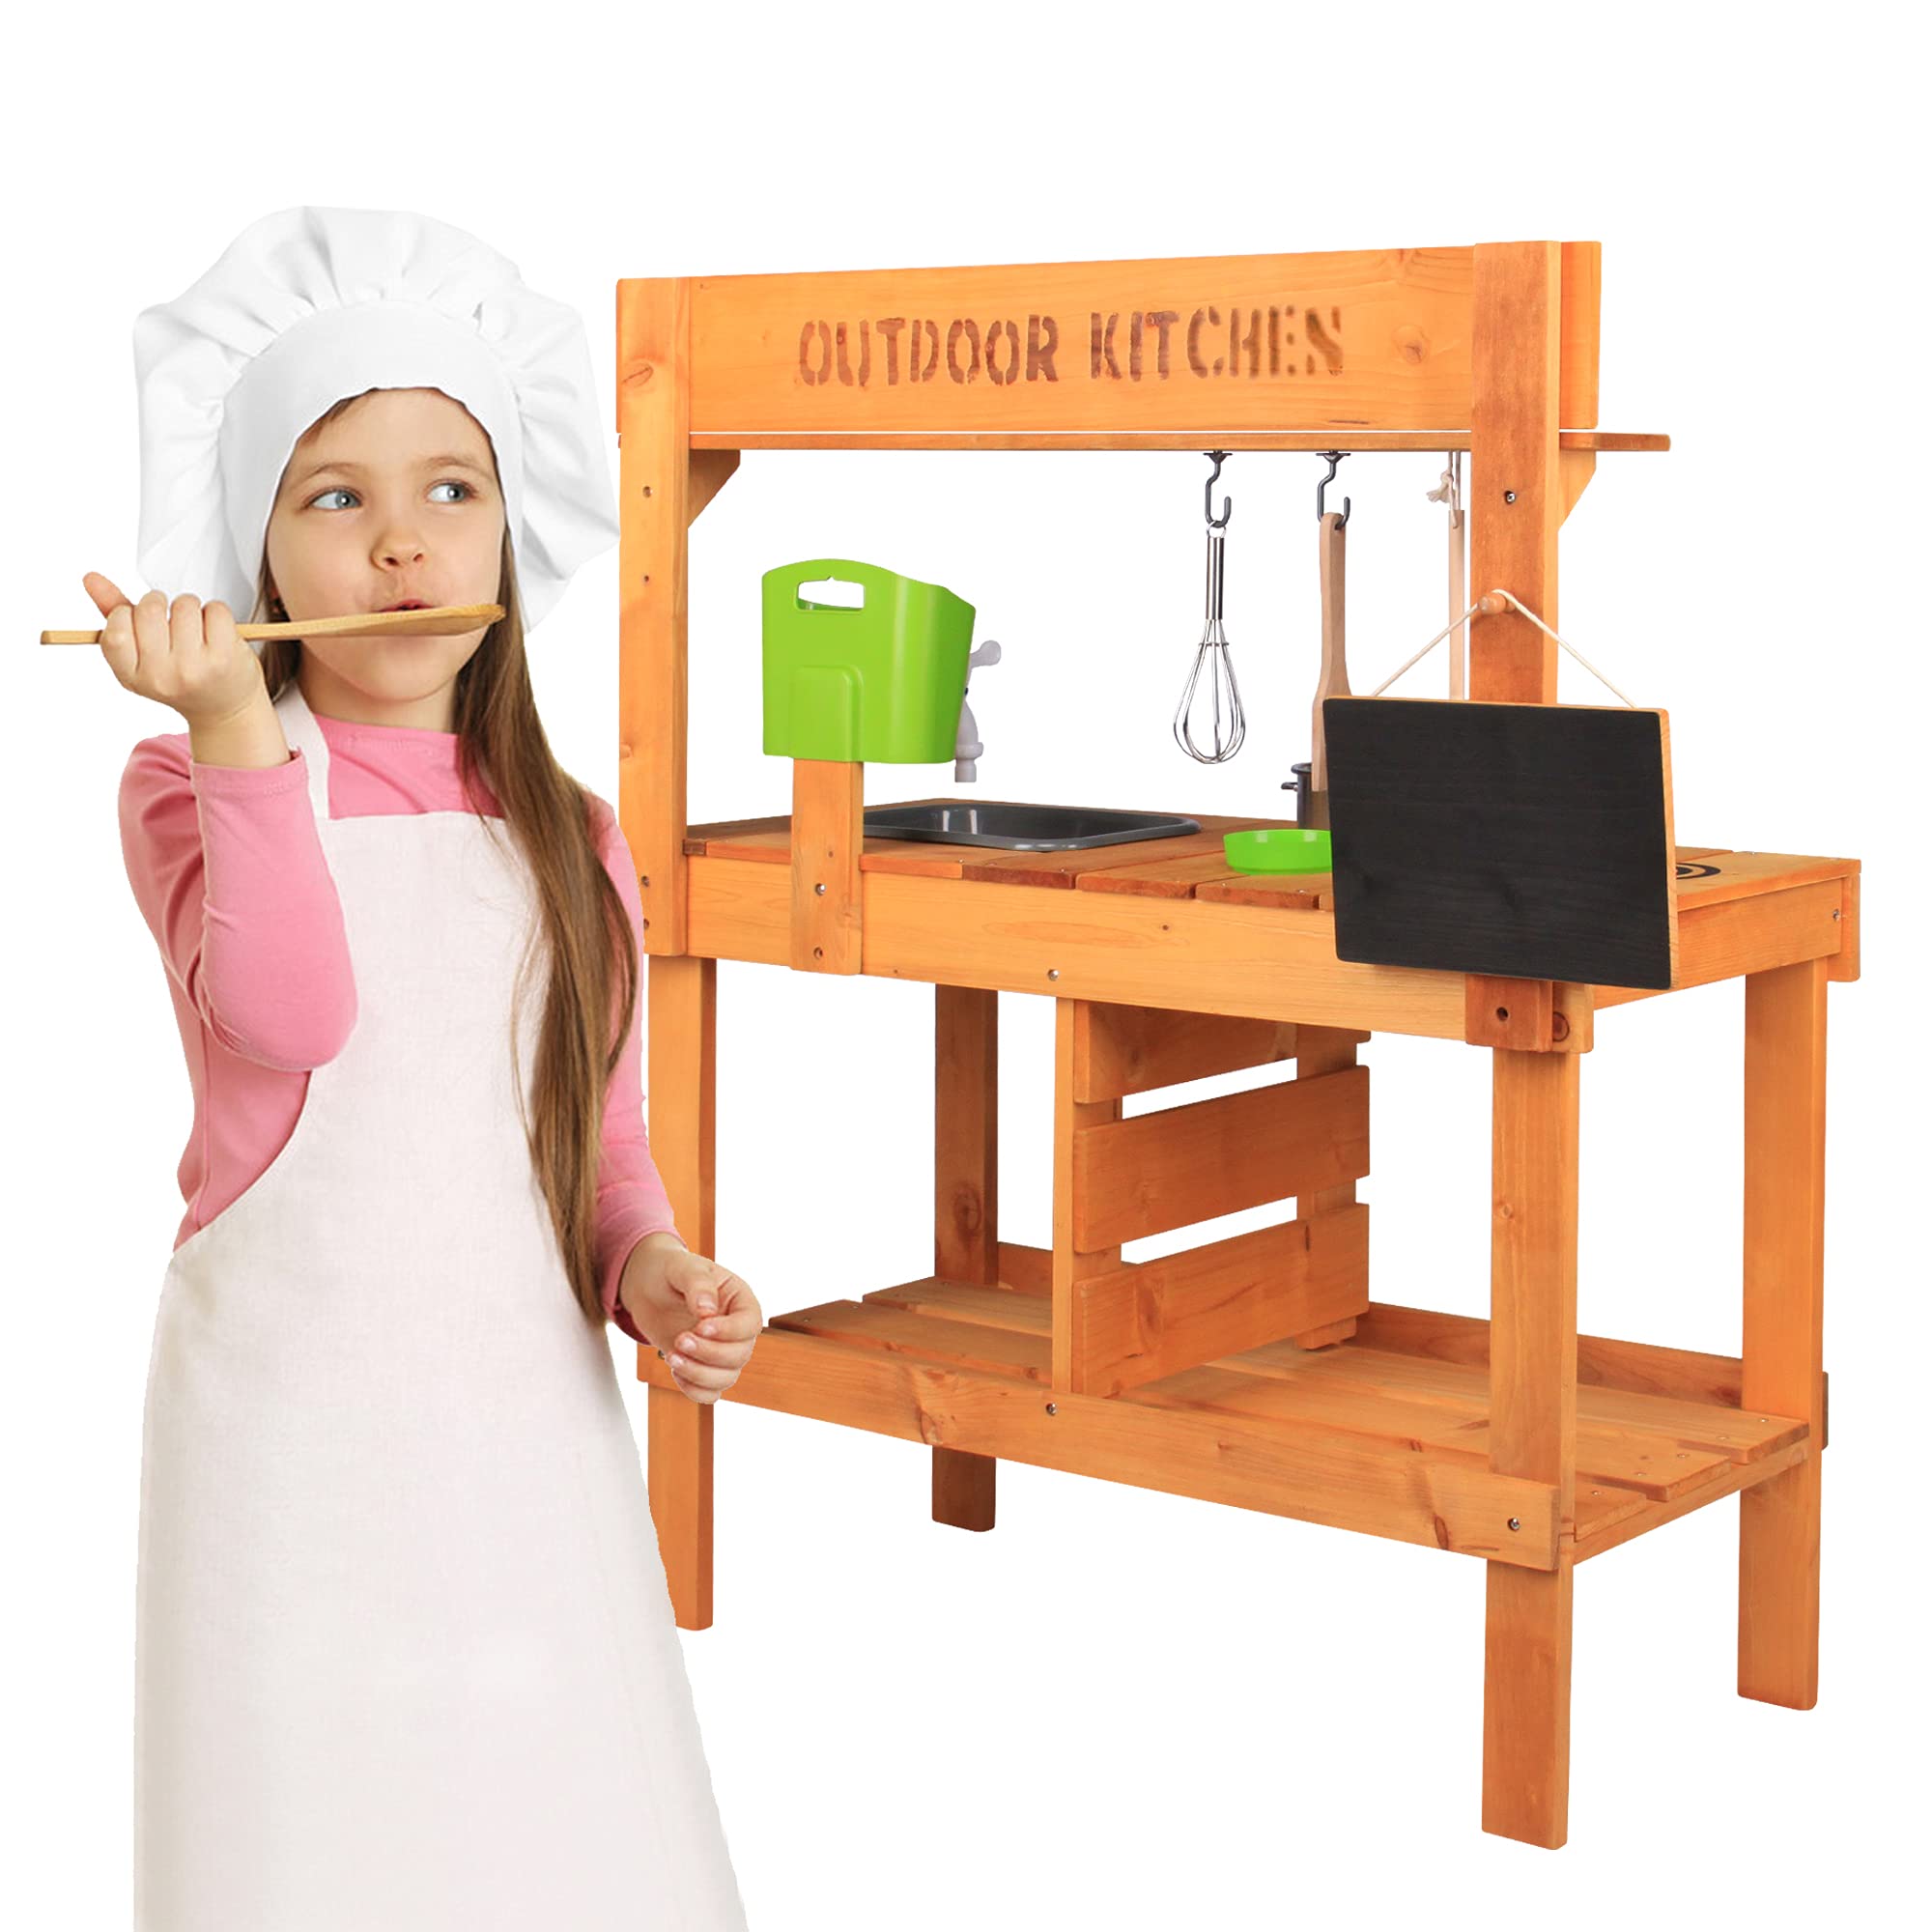 Wooden Kitchen, Kitchen Accessories and Garden Sink, Backyard Pretend Play for Toddlers,Kids Outdoor Upright Kitchen Playset with Faucet, 32.3 x 16.9 x 38 inches, Wood Color